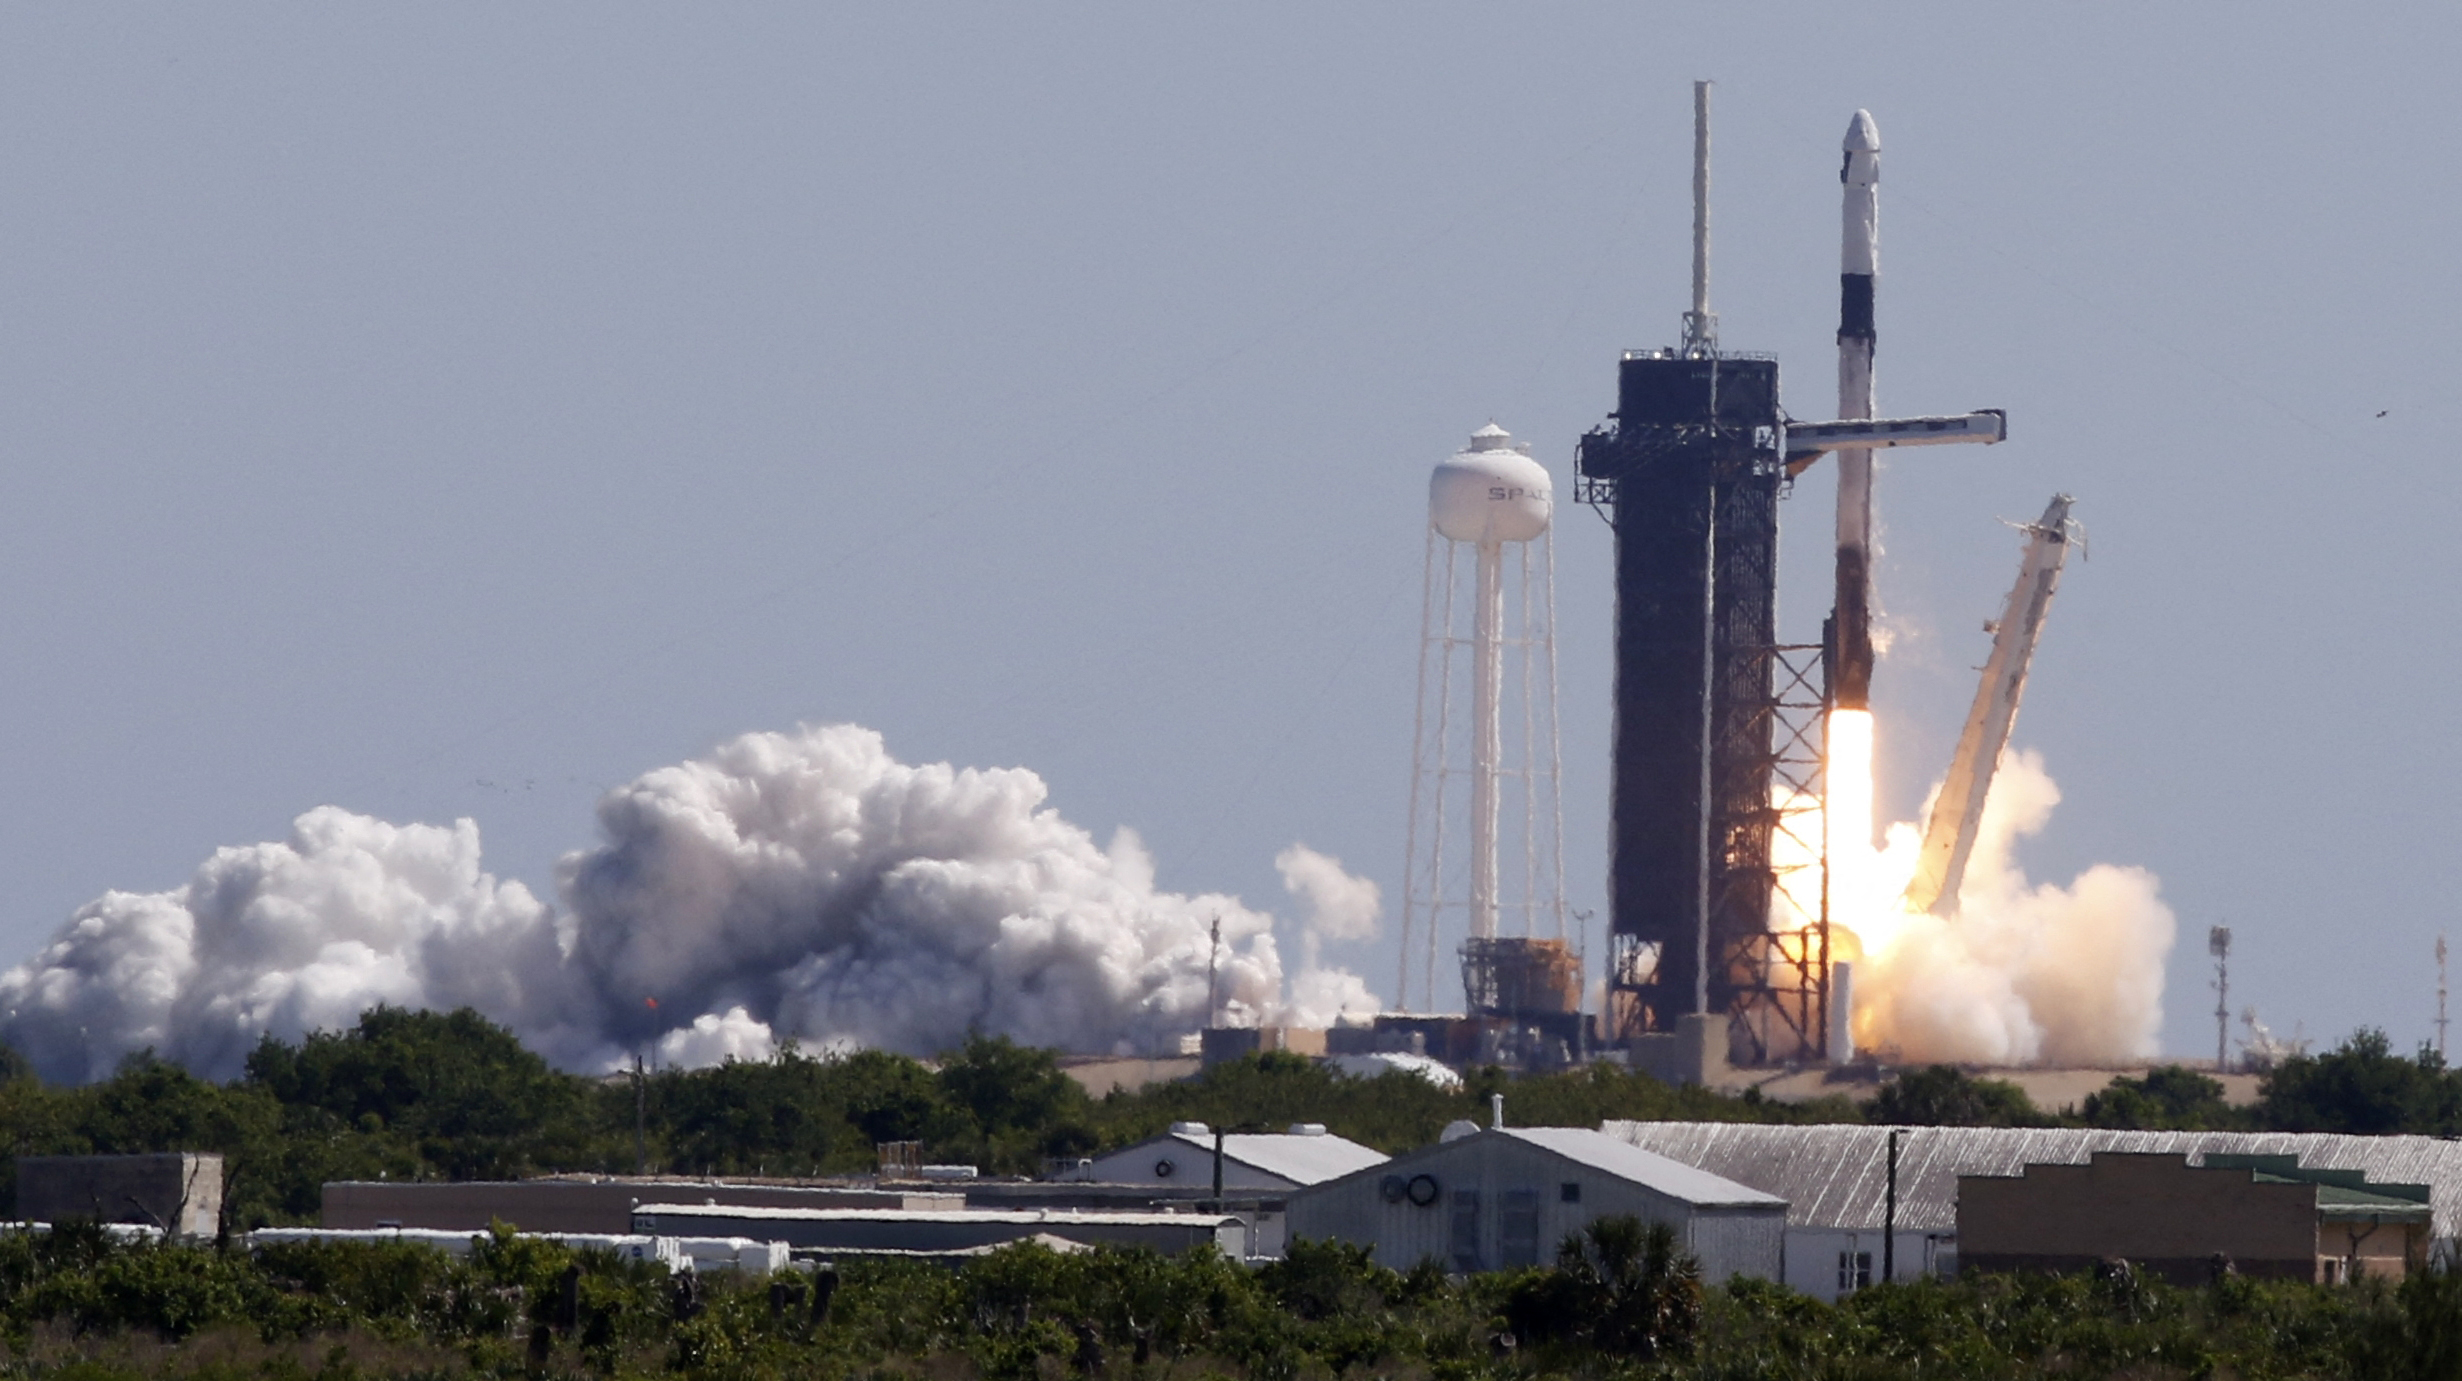 A SpaceX Falcon 9 rocket, lifts off on the first private astronaut mission to the International Space Station